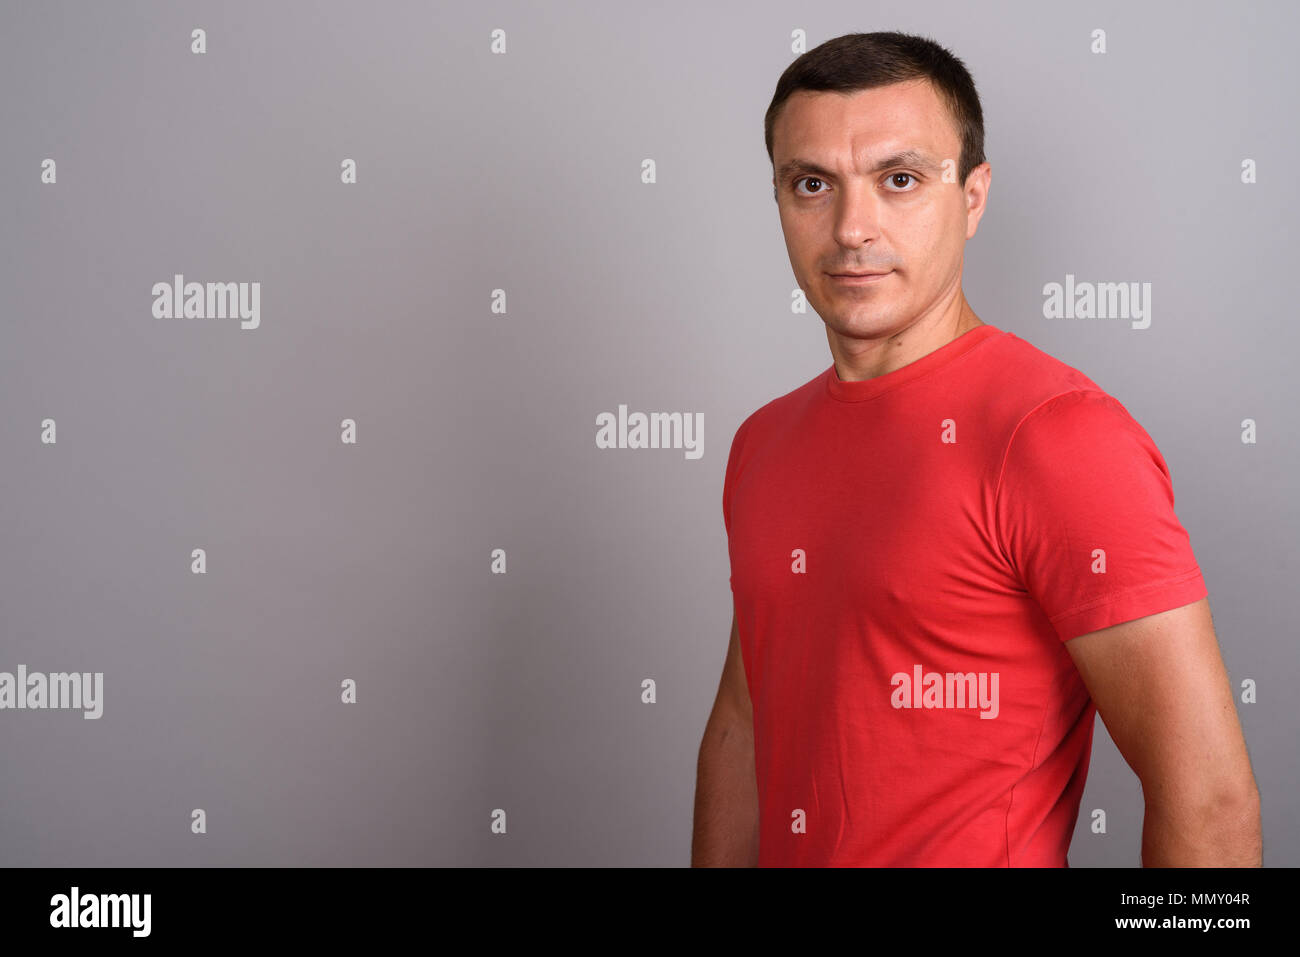 Man wearing red shirt against gray background Stock Photo